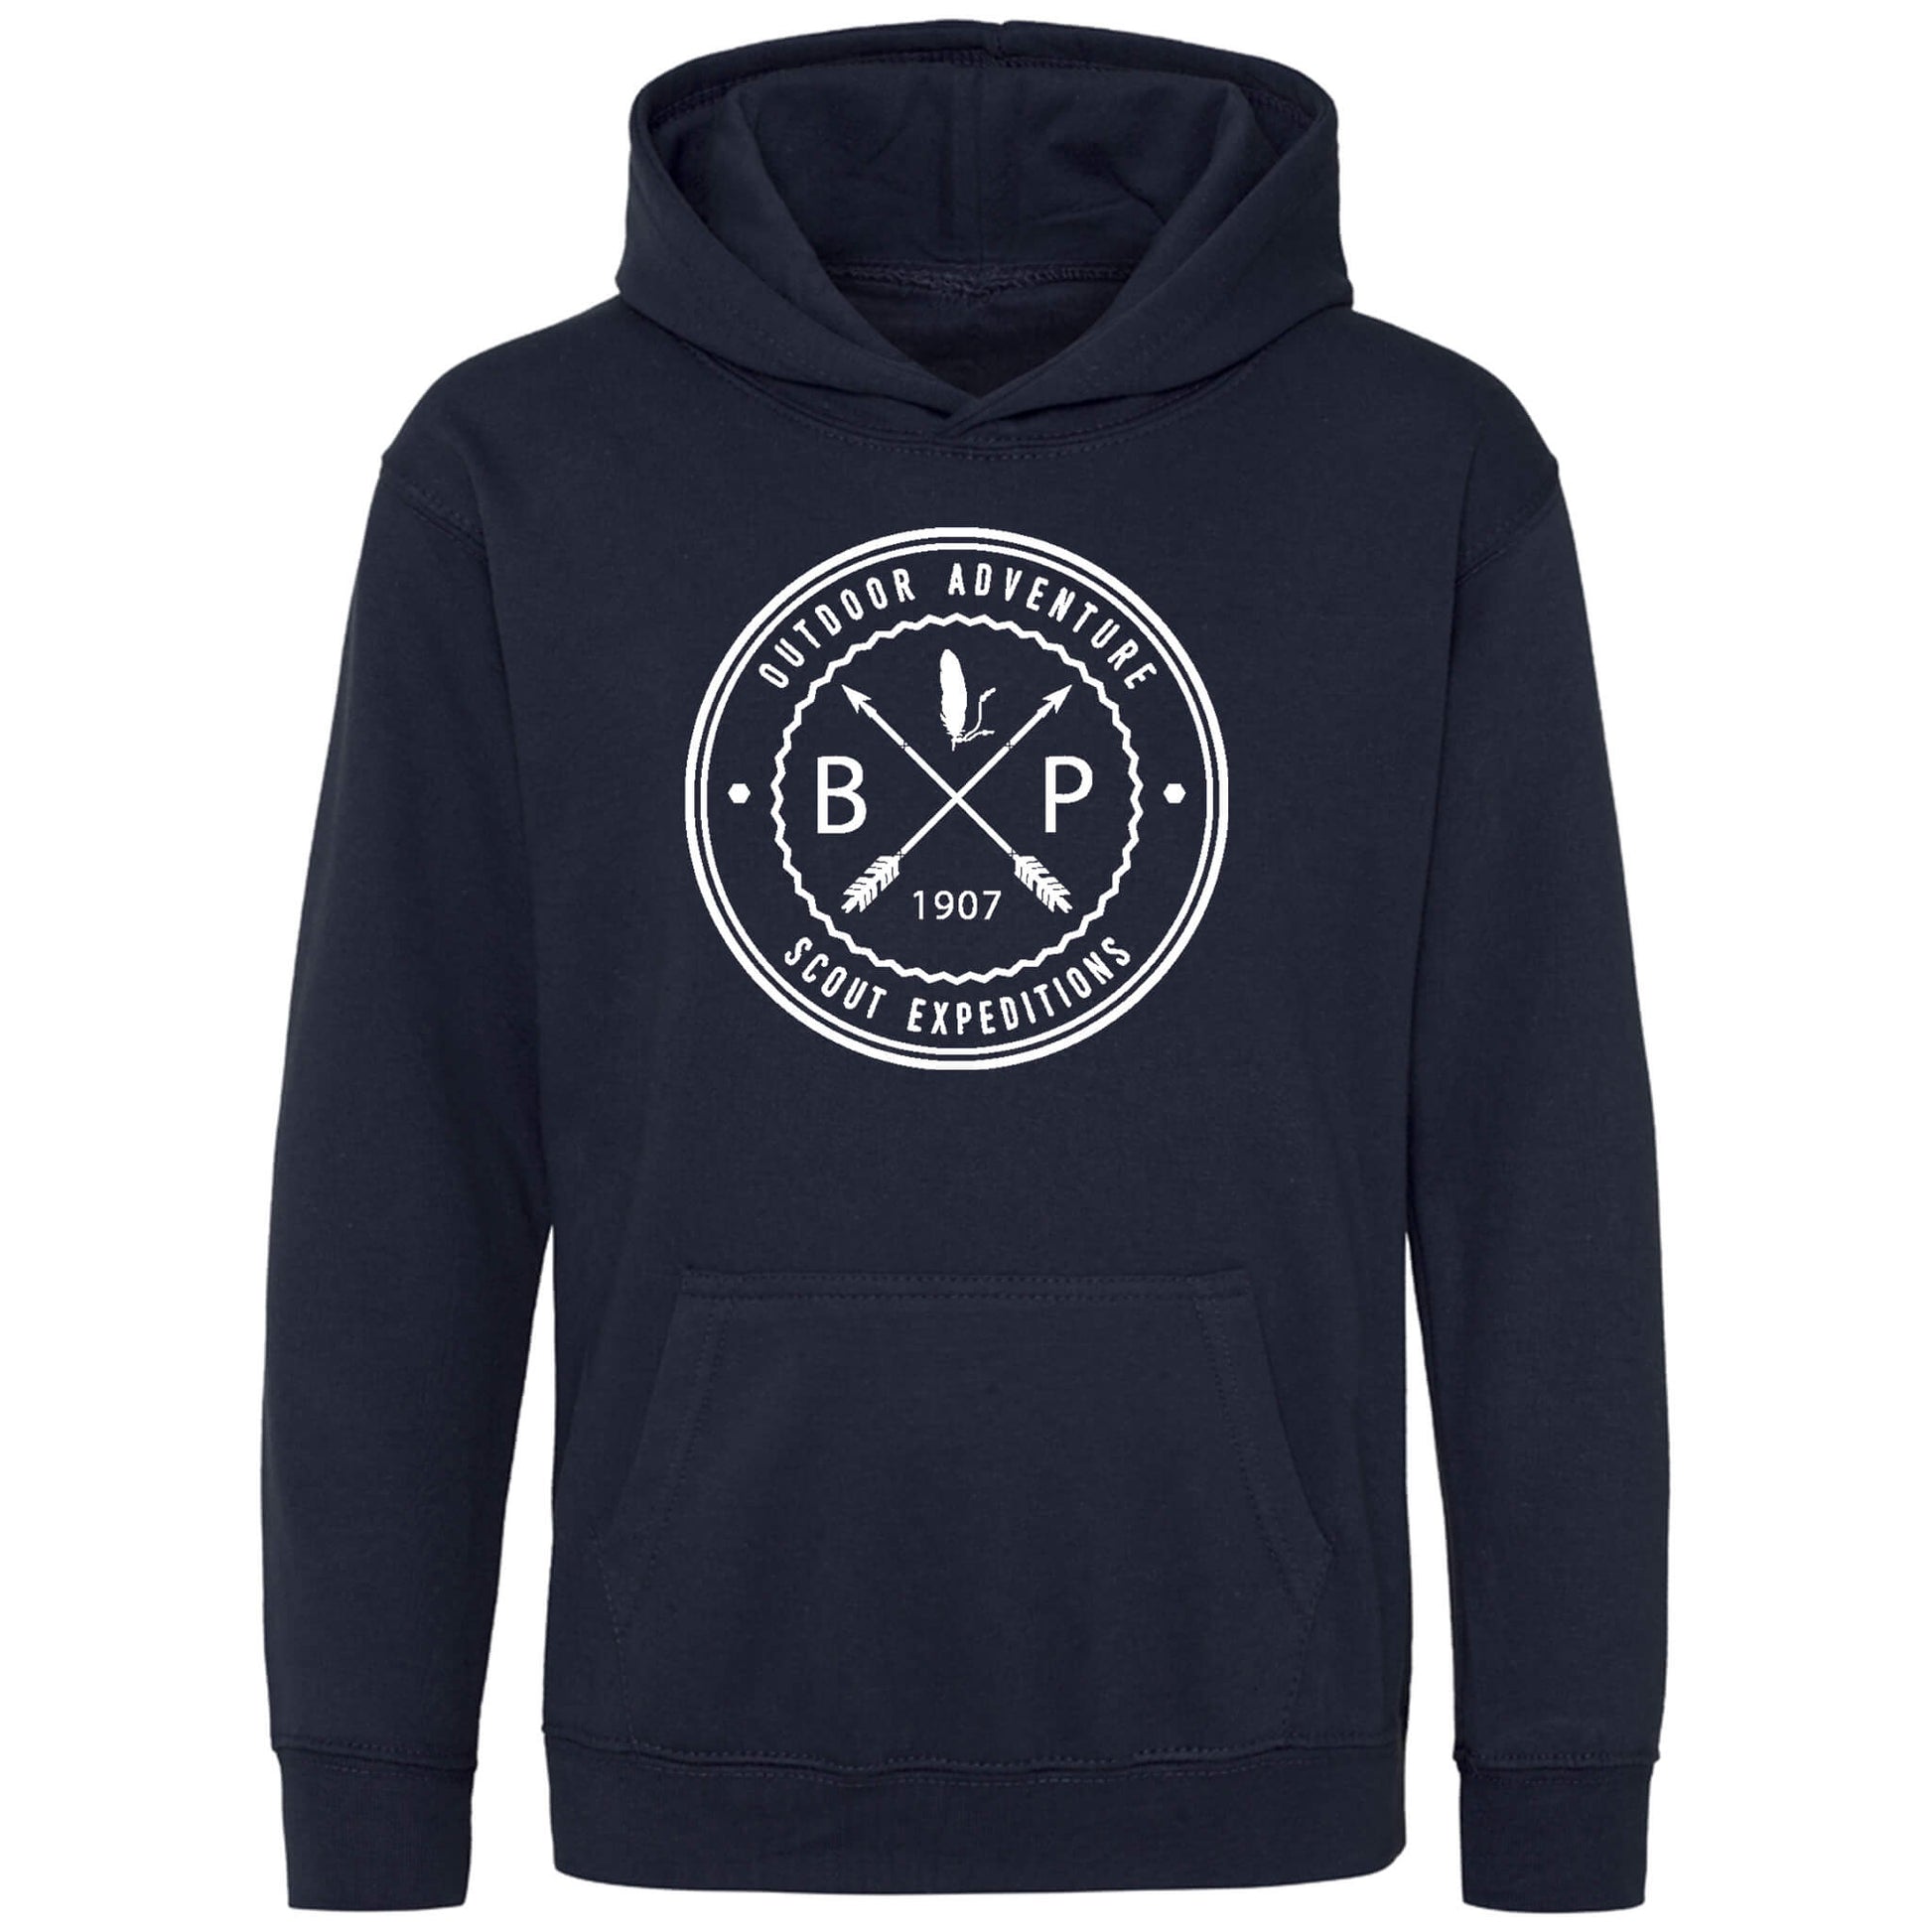 Bp Scouting Expeditions Since 1907 Hoodie Navy